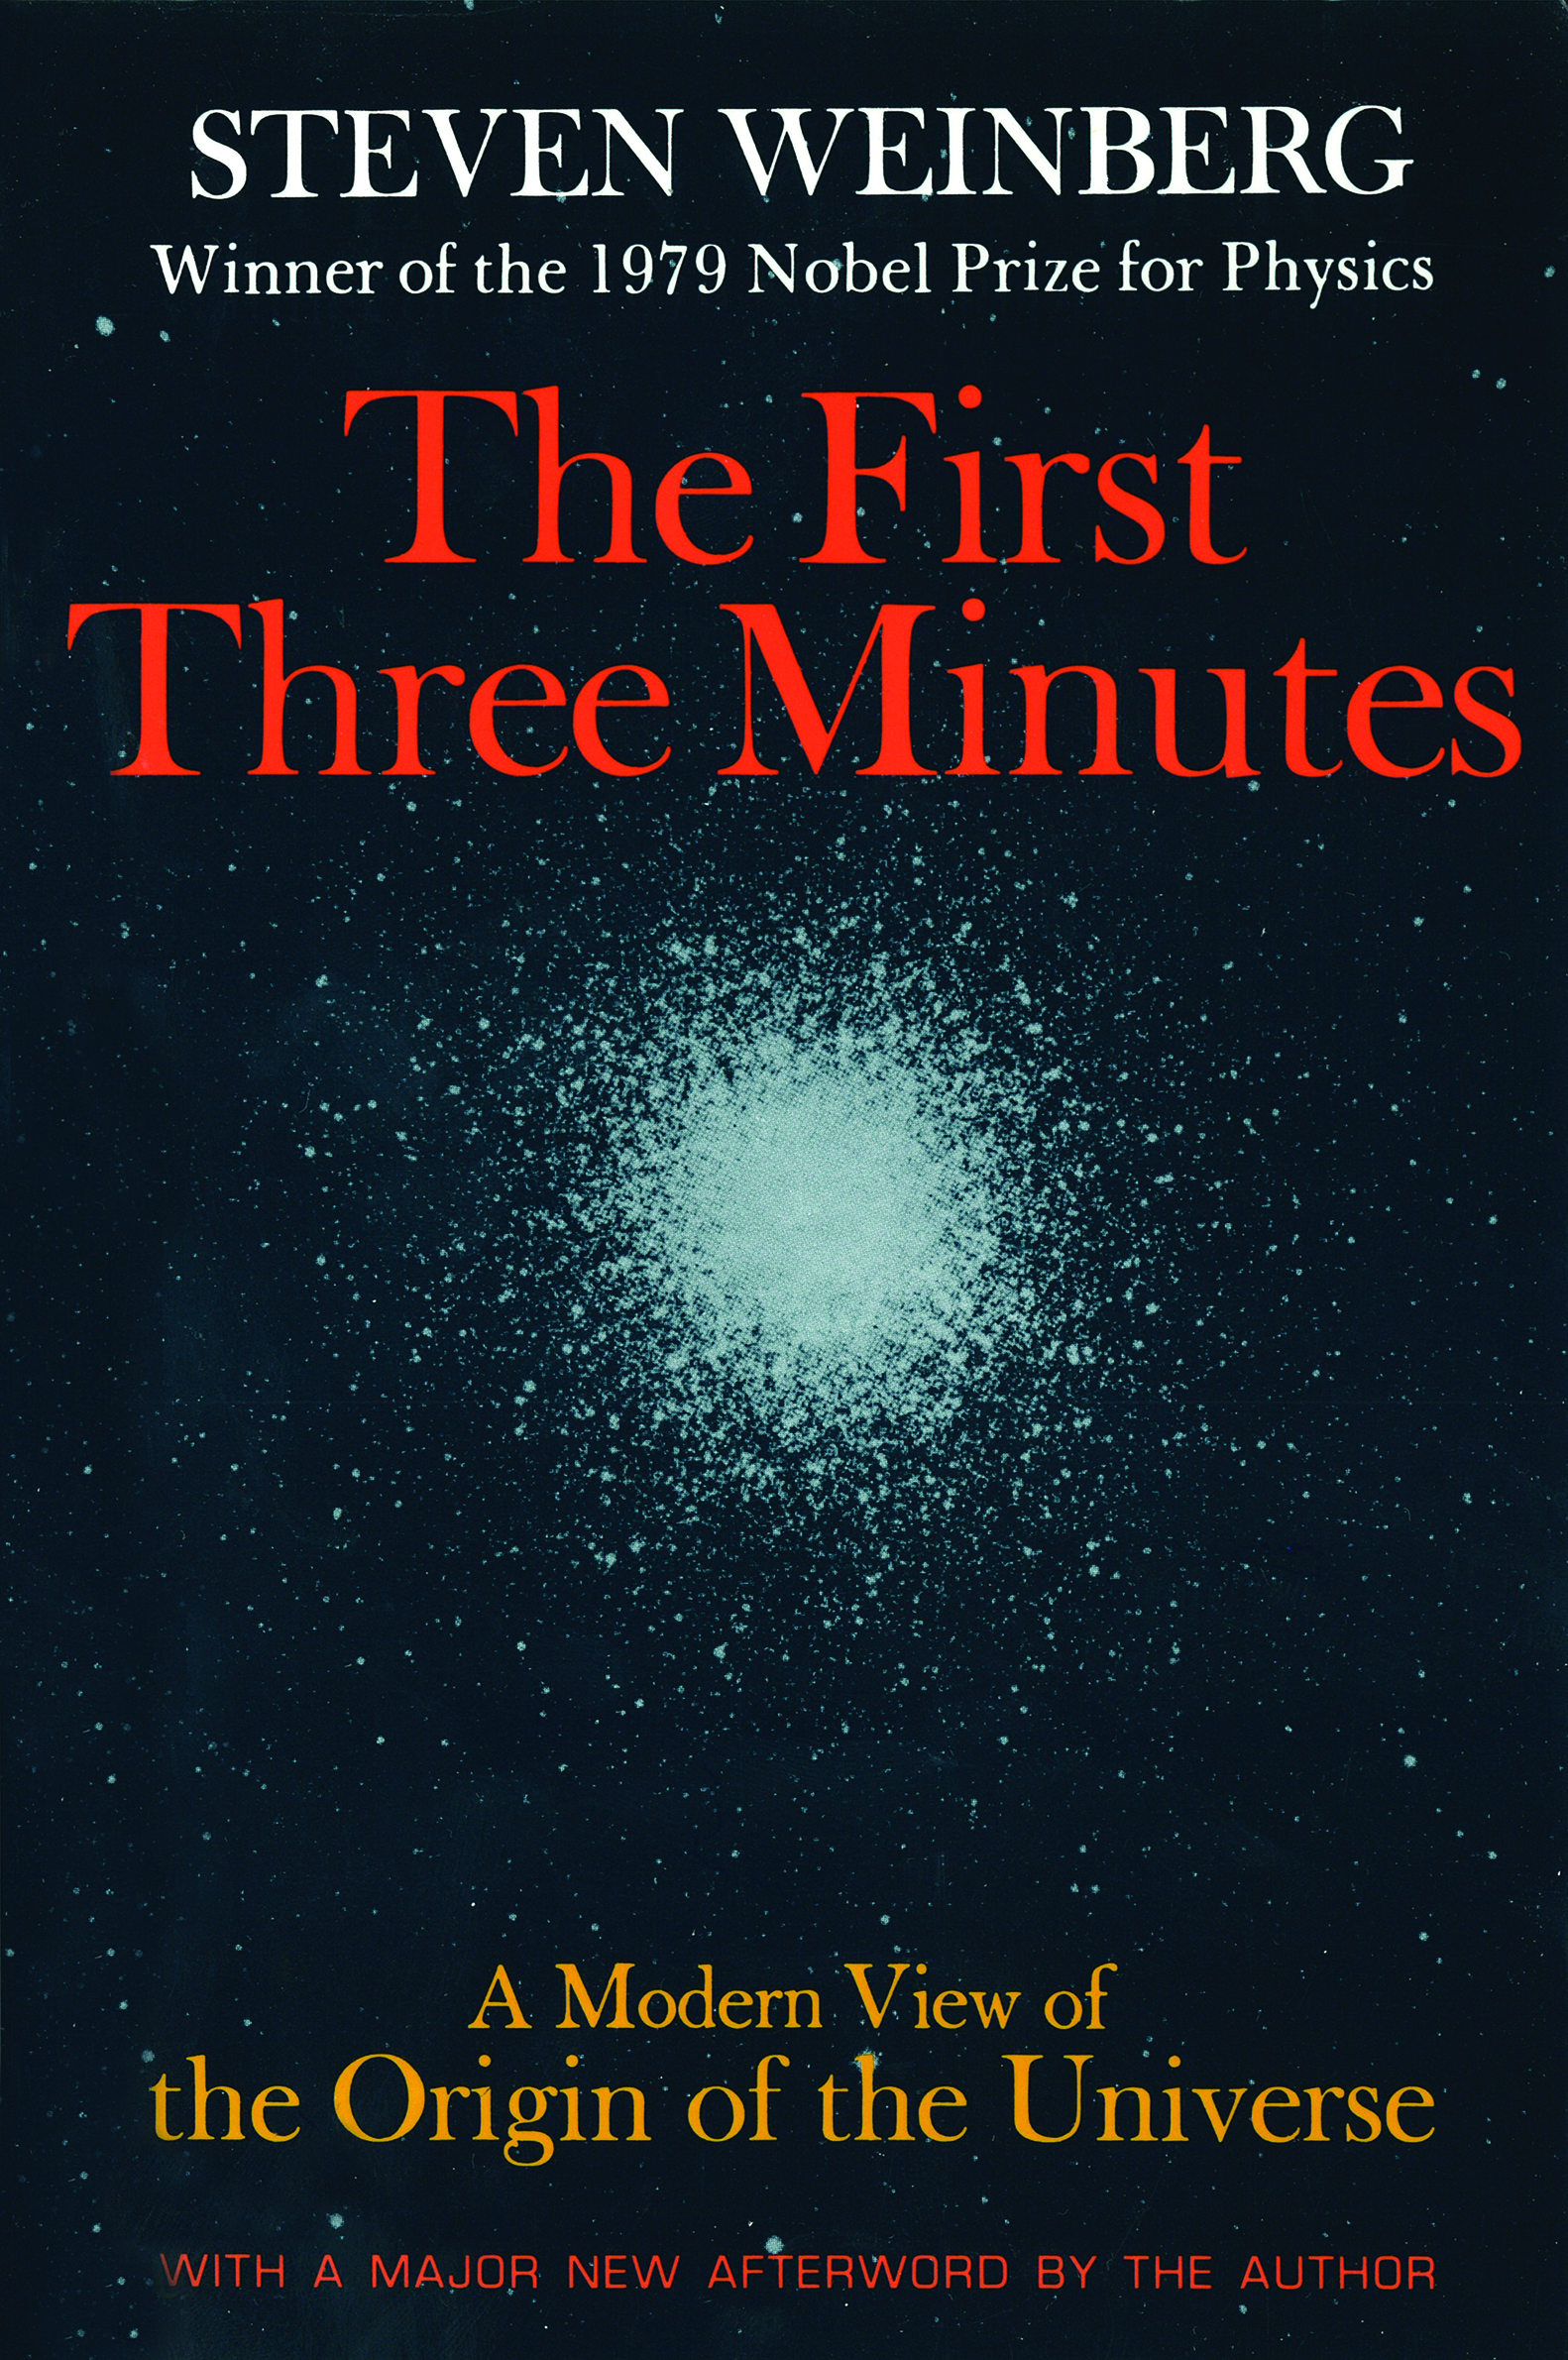 The First Three Minutes by Steven Weinberg | Hachette Book Group